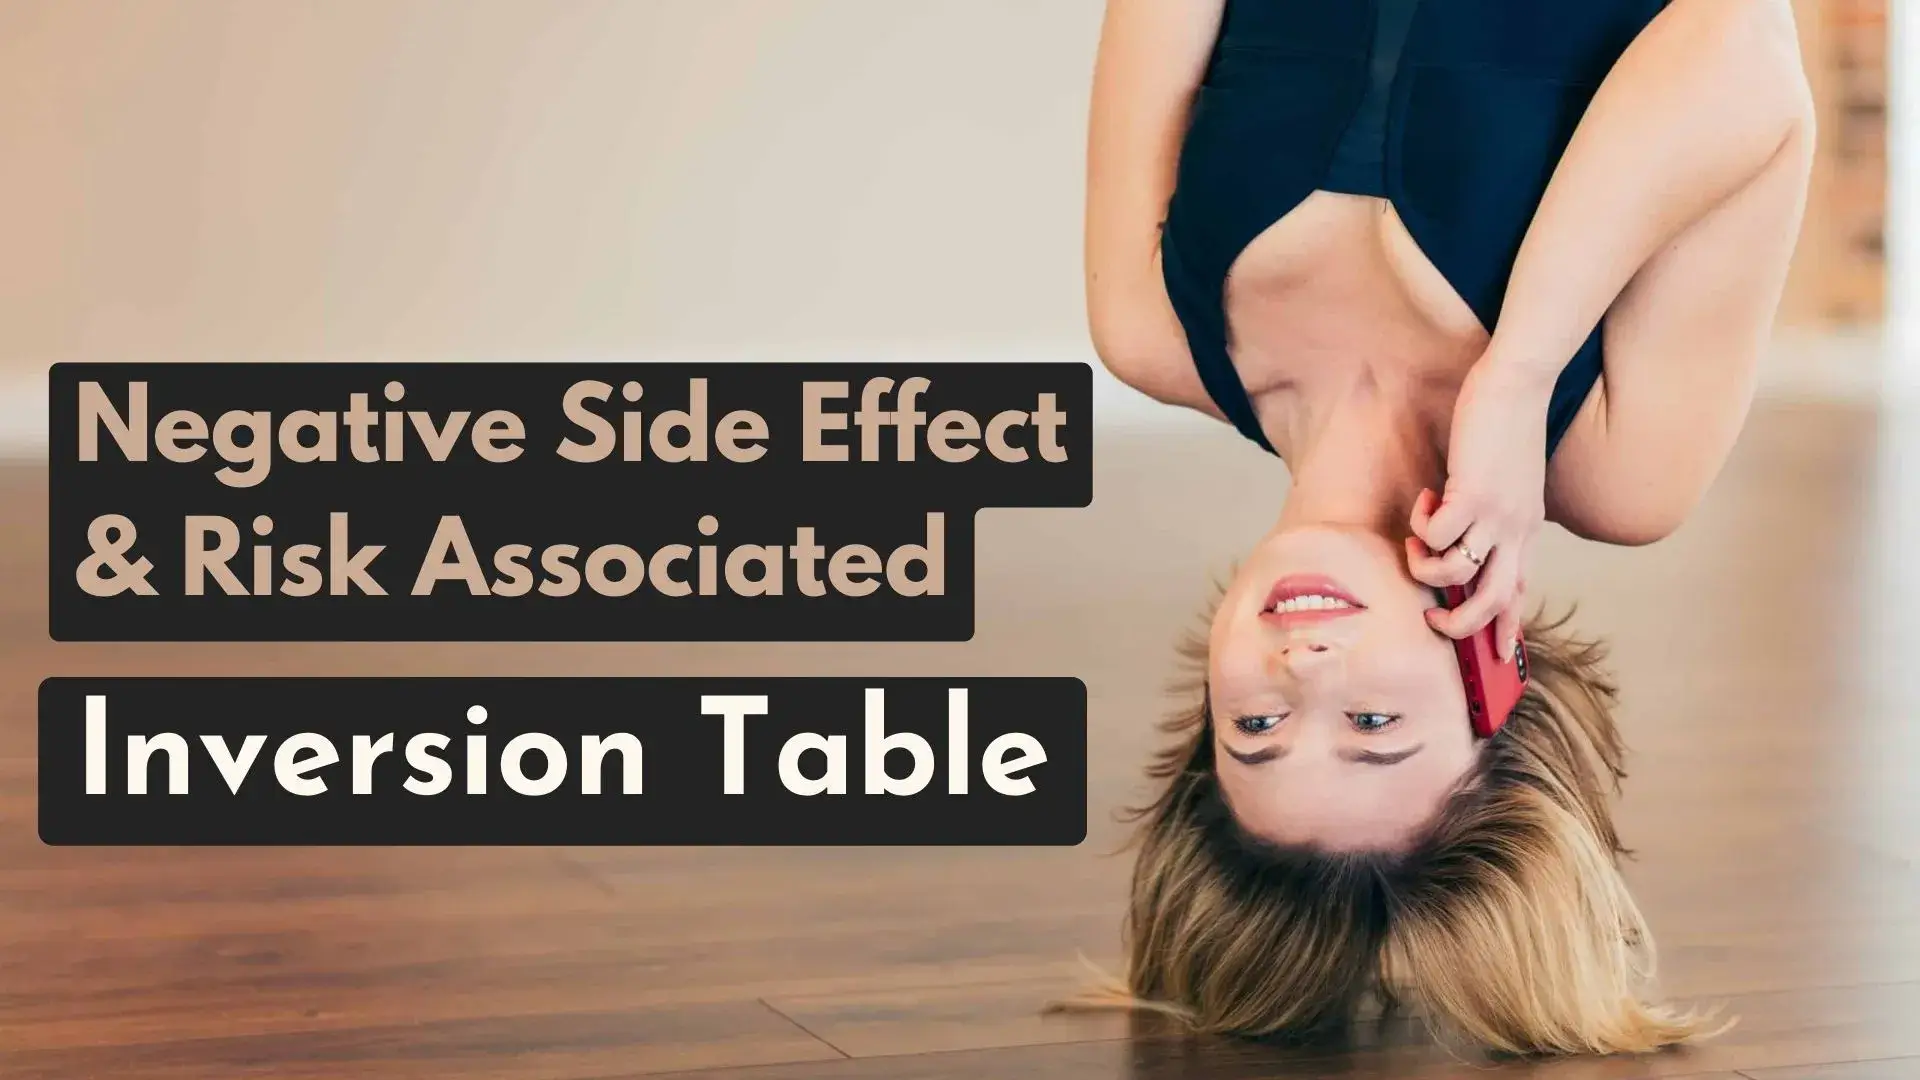 Inversion Table Negative Side Effects & Risk Associated With Inversion Therapy BY Inversiontablehub.com